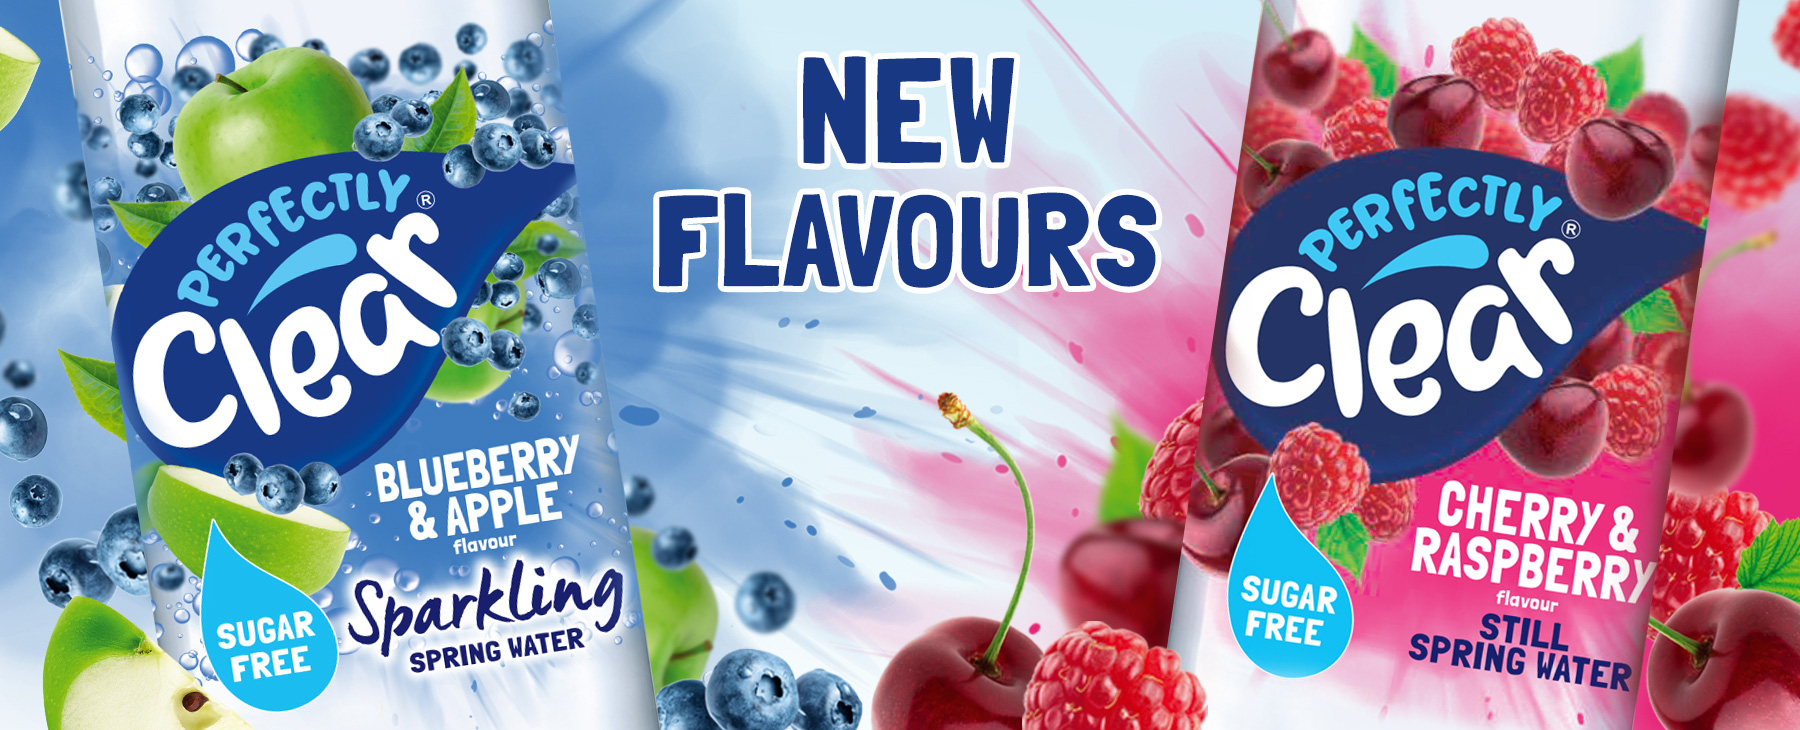 Perfectly Clear - New Flavours